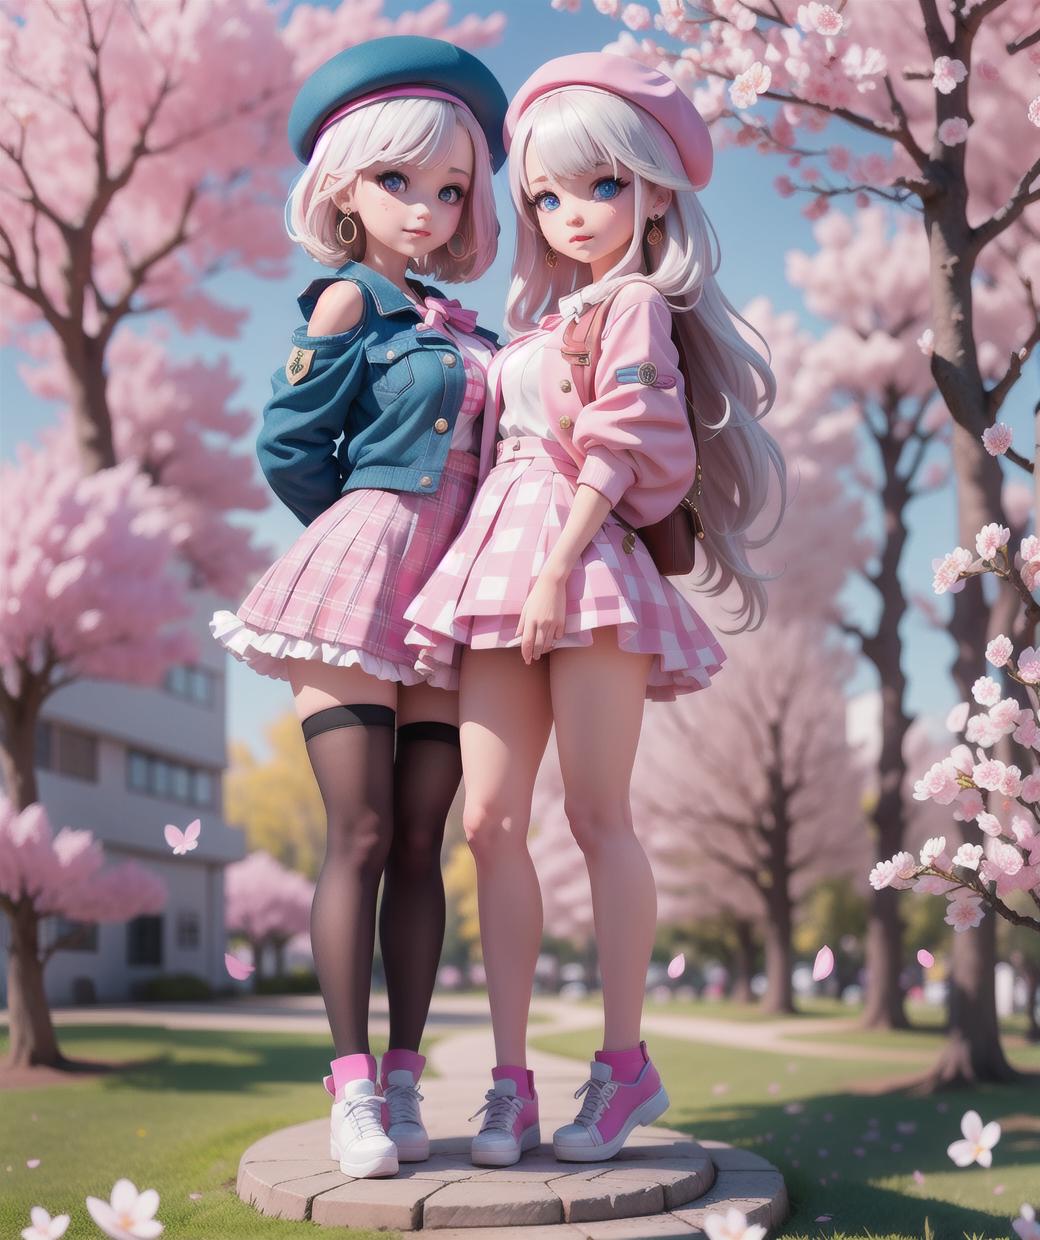 Two cartoon dolls in pink and blue dresses standing on a pathway.